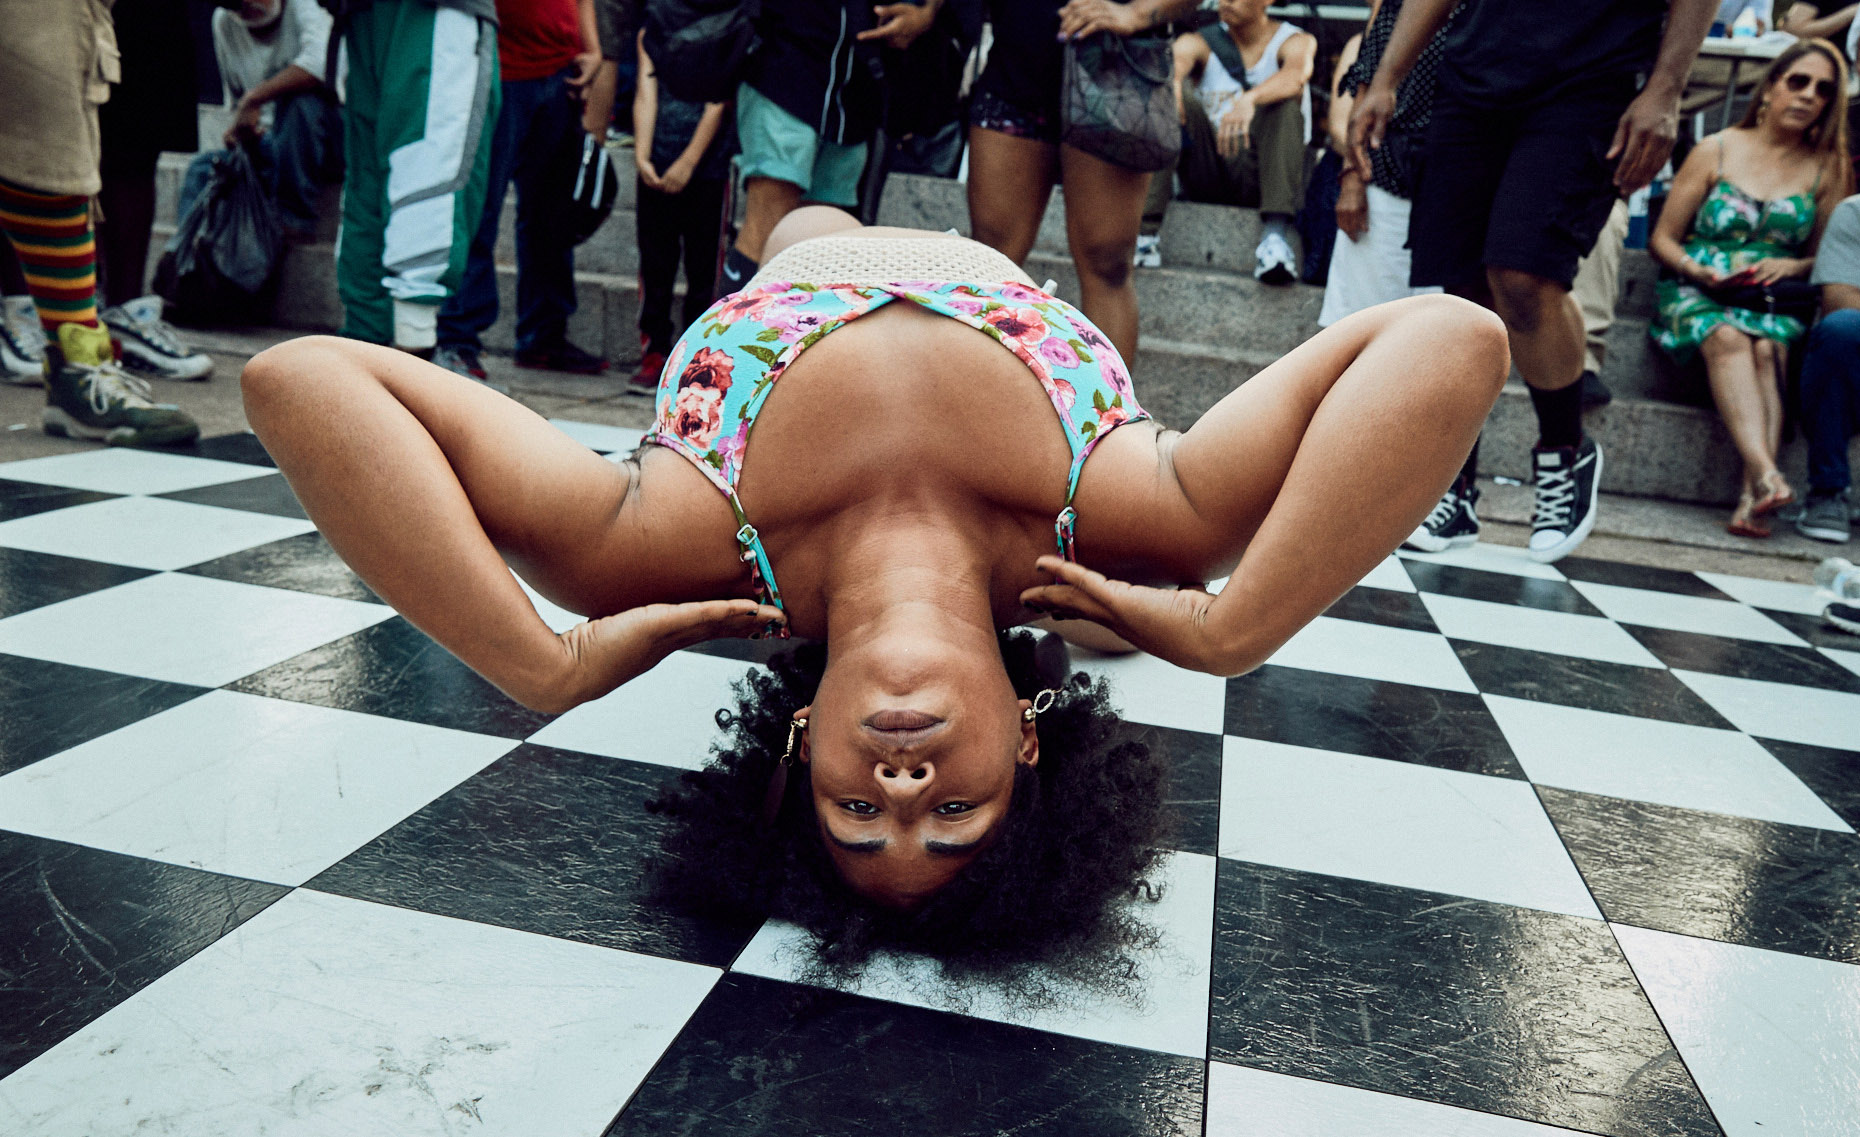 Black female breakdancer in Chicago | lifestyle photography by Saverio Truglia